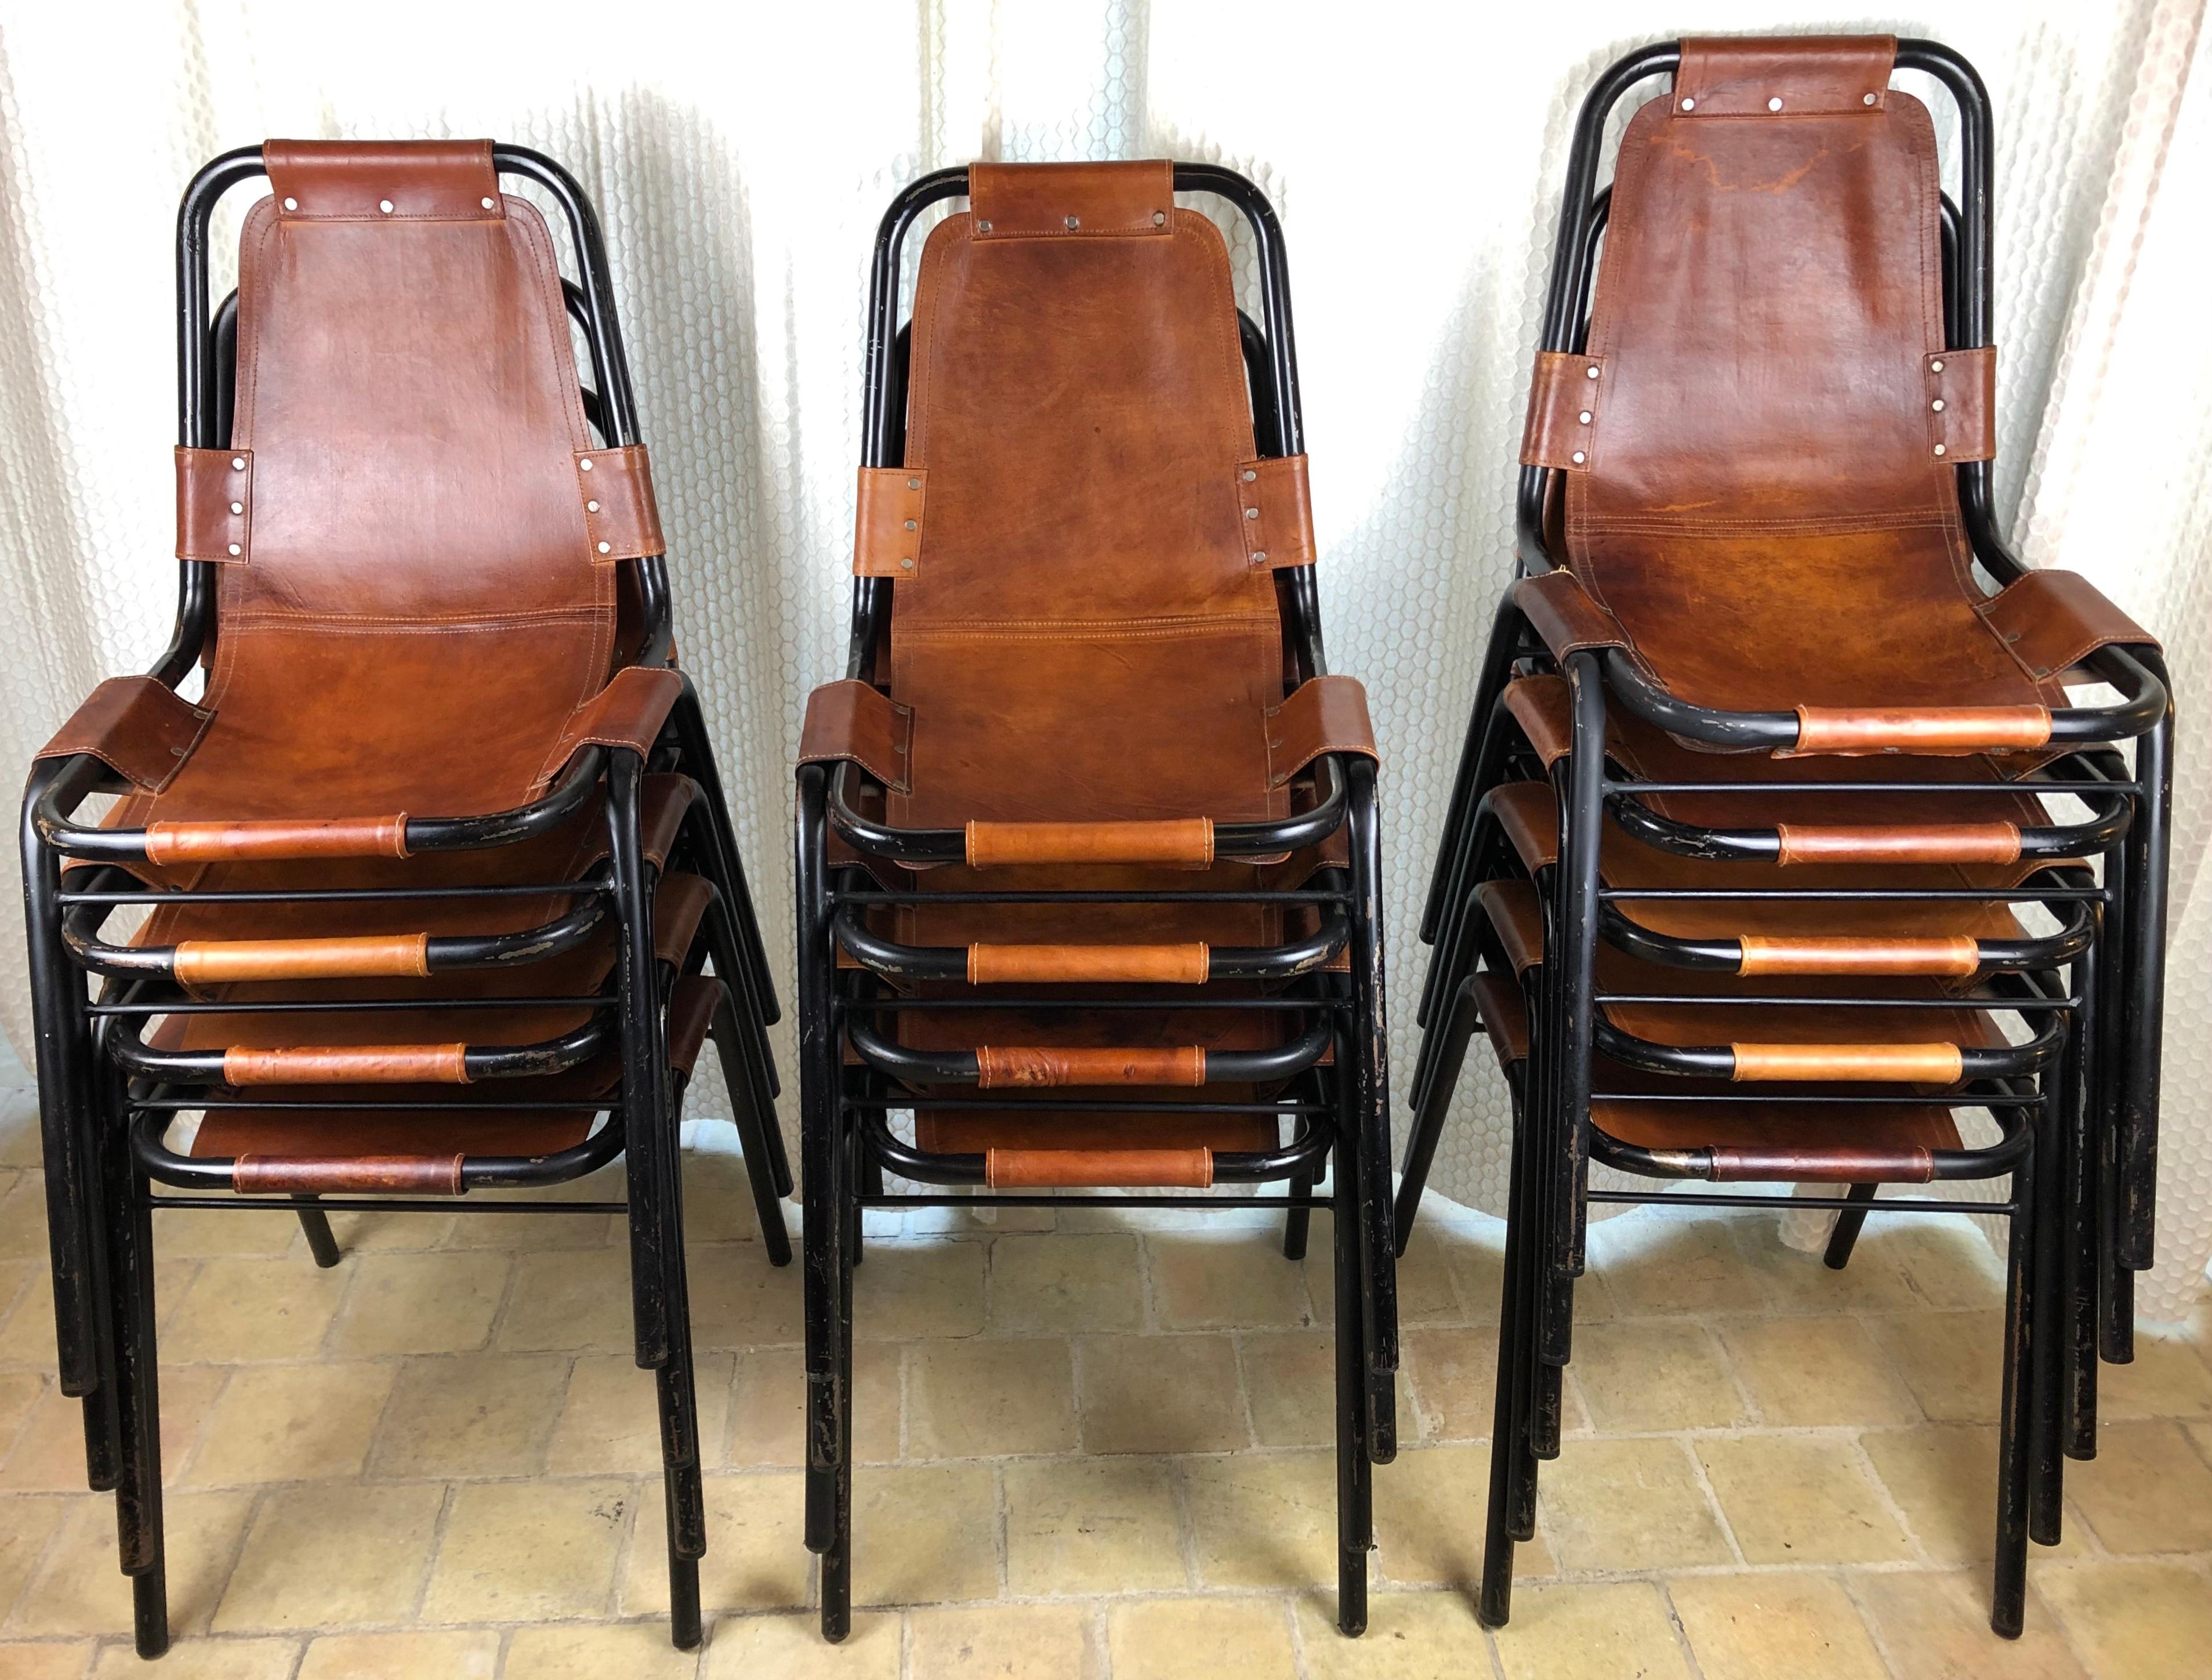 Mid-Century Modern Charlotte Perriand Dining Chairs for Les Arcs Ski Resort Set of 13 Brown Leather